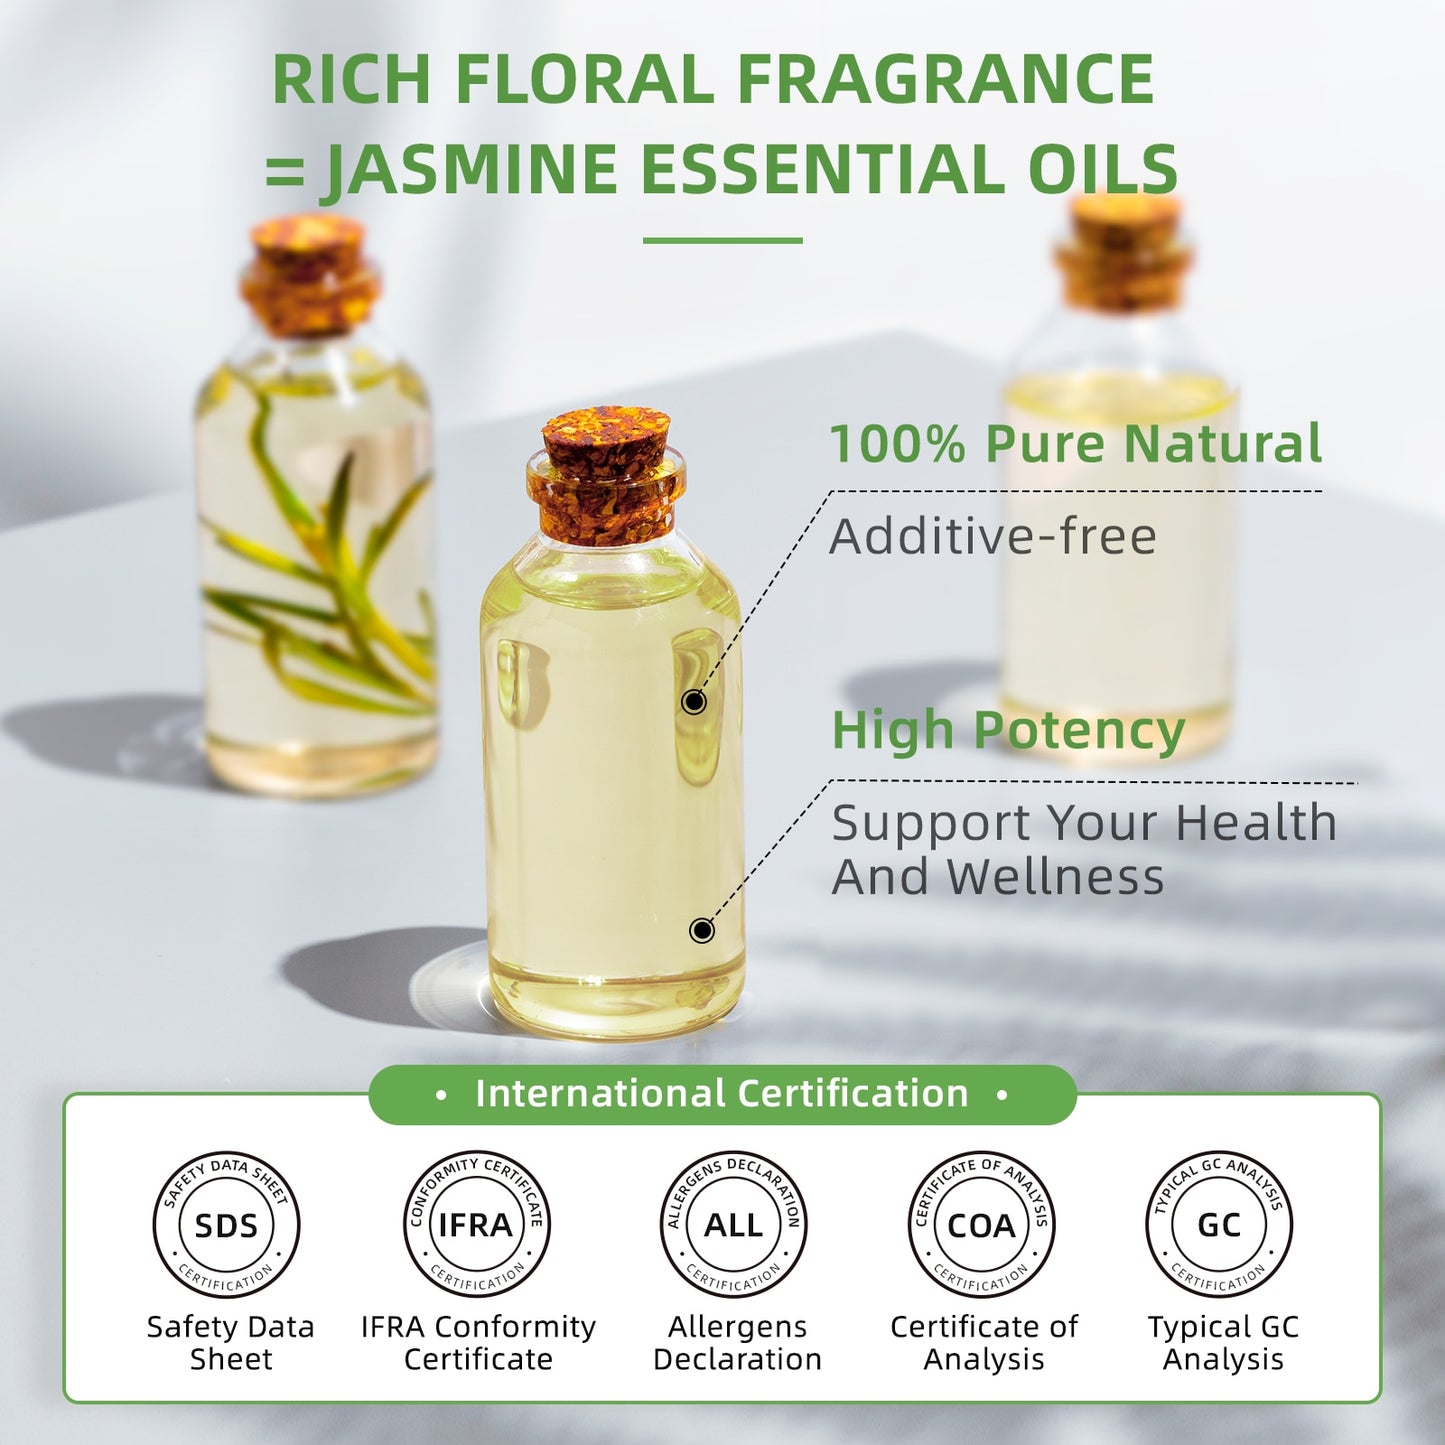 HIQILI 100ML Jasmine Essential Oils ,100% Pure Nature for Aromatherapy | Used for Diffuser,Humidifier,Massage | Fragrance DIY - youronestopstore23